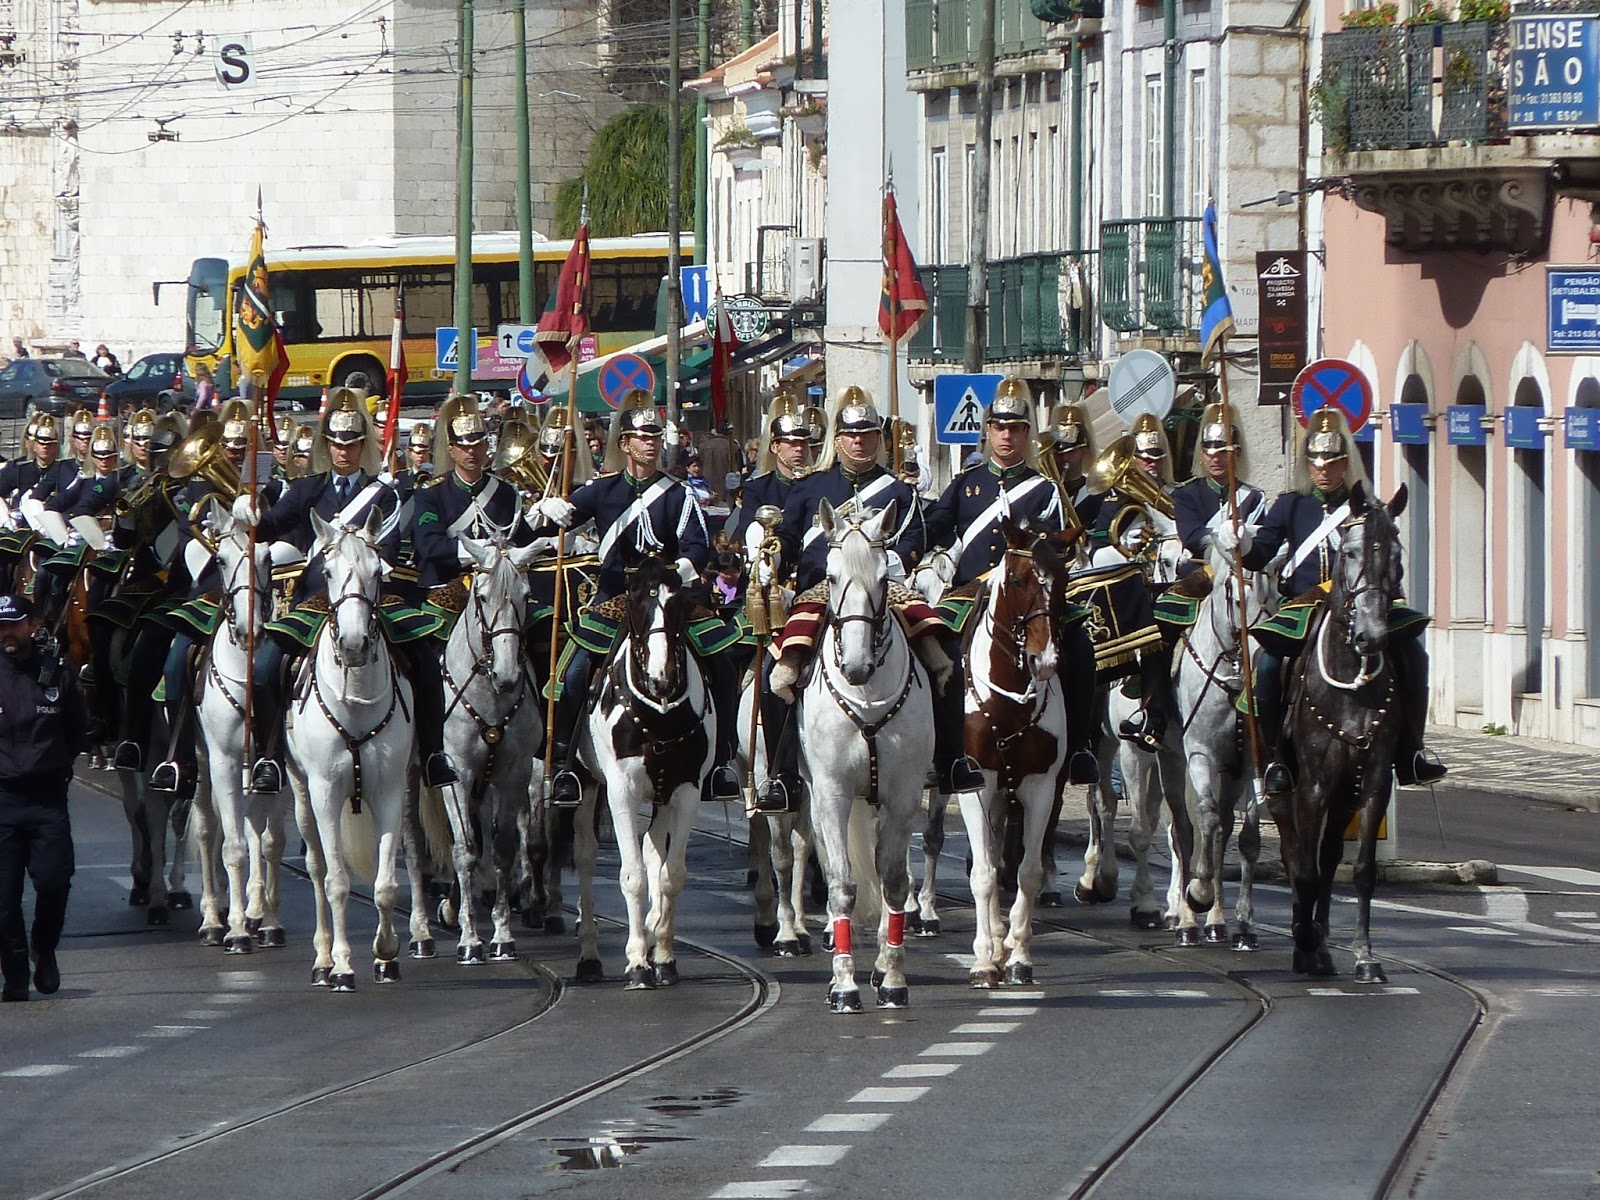 y-es travel chapter: Portugal and a military show of force